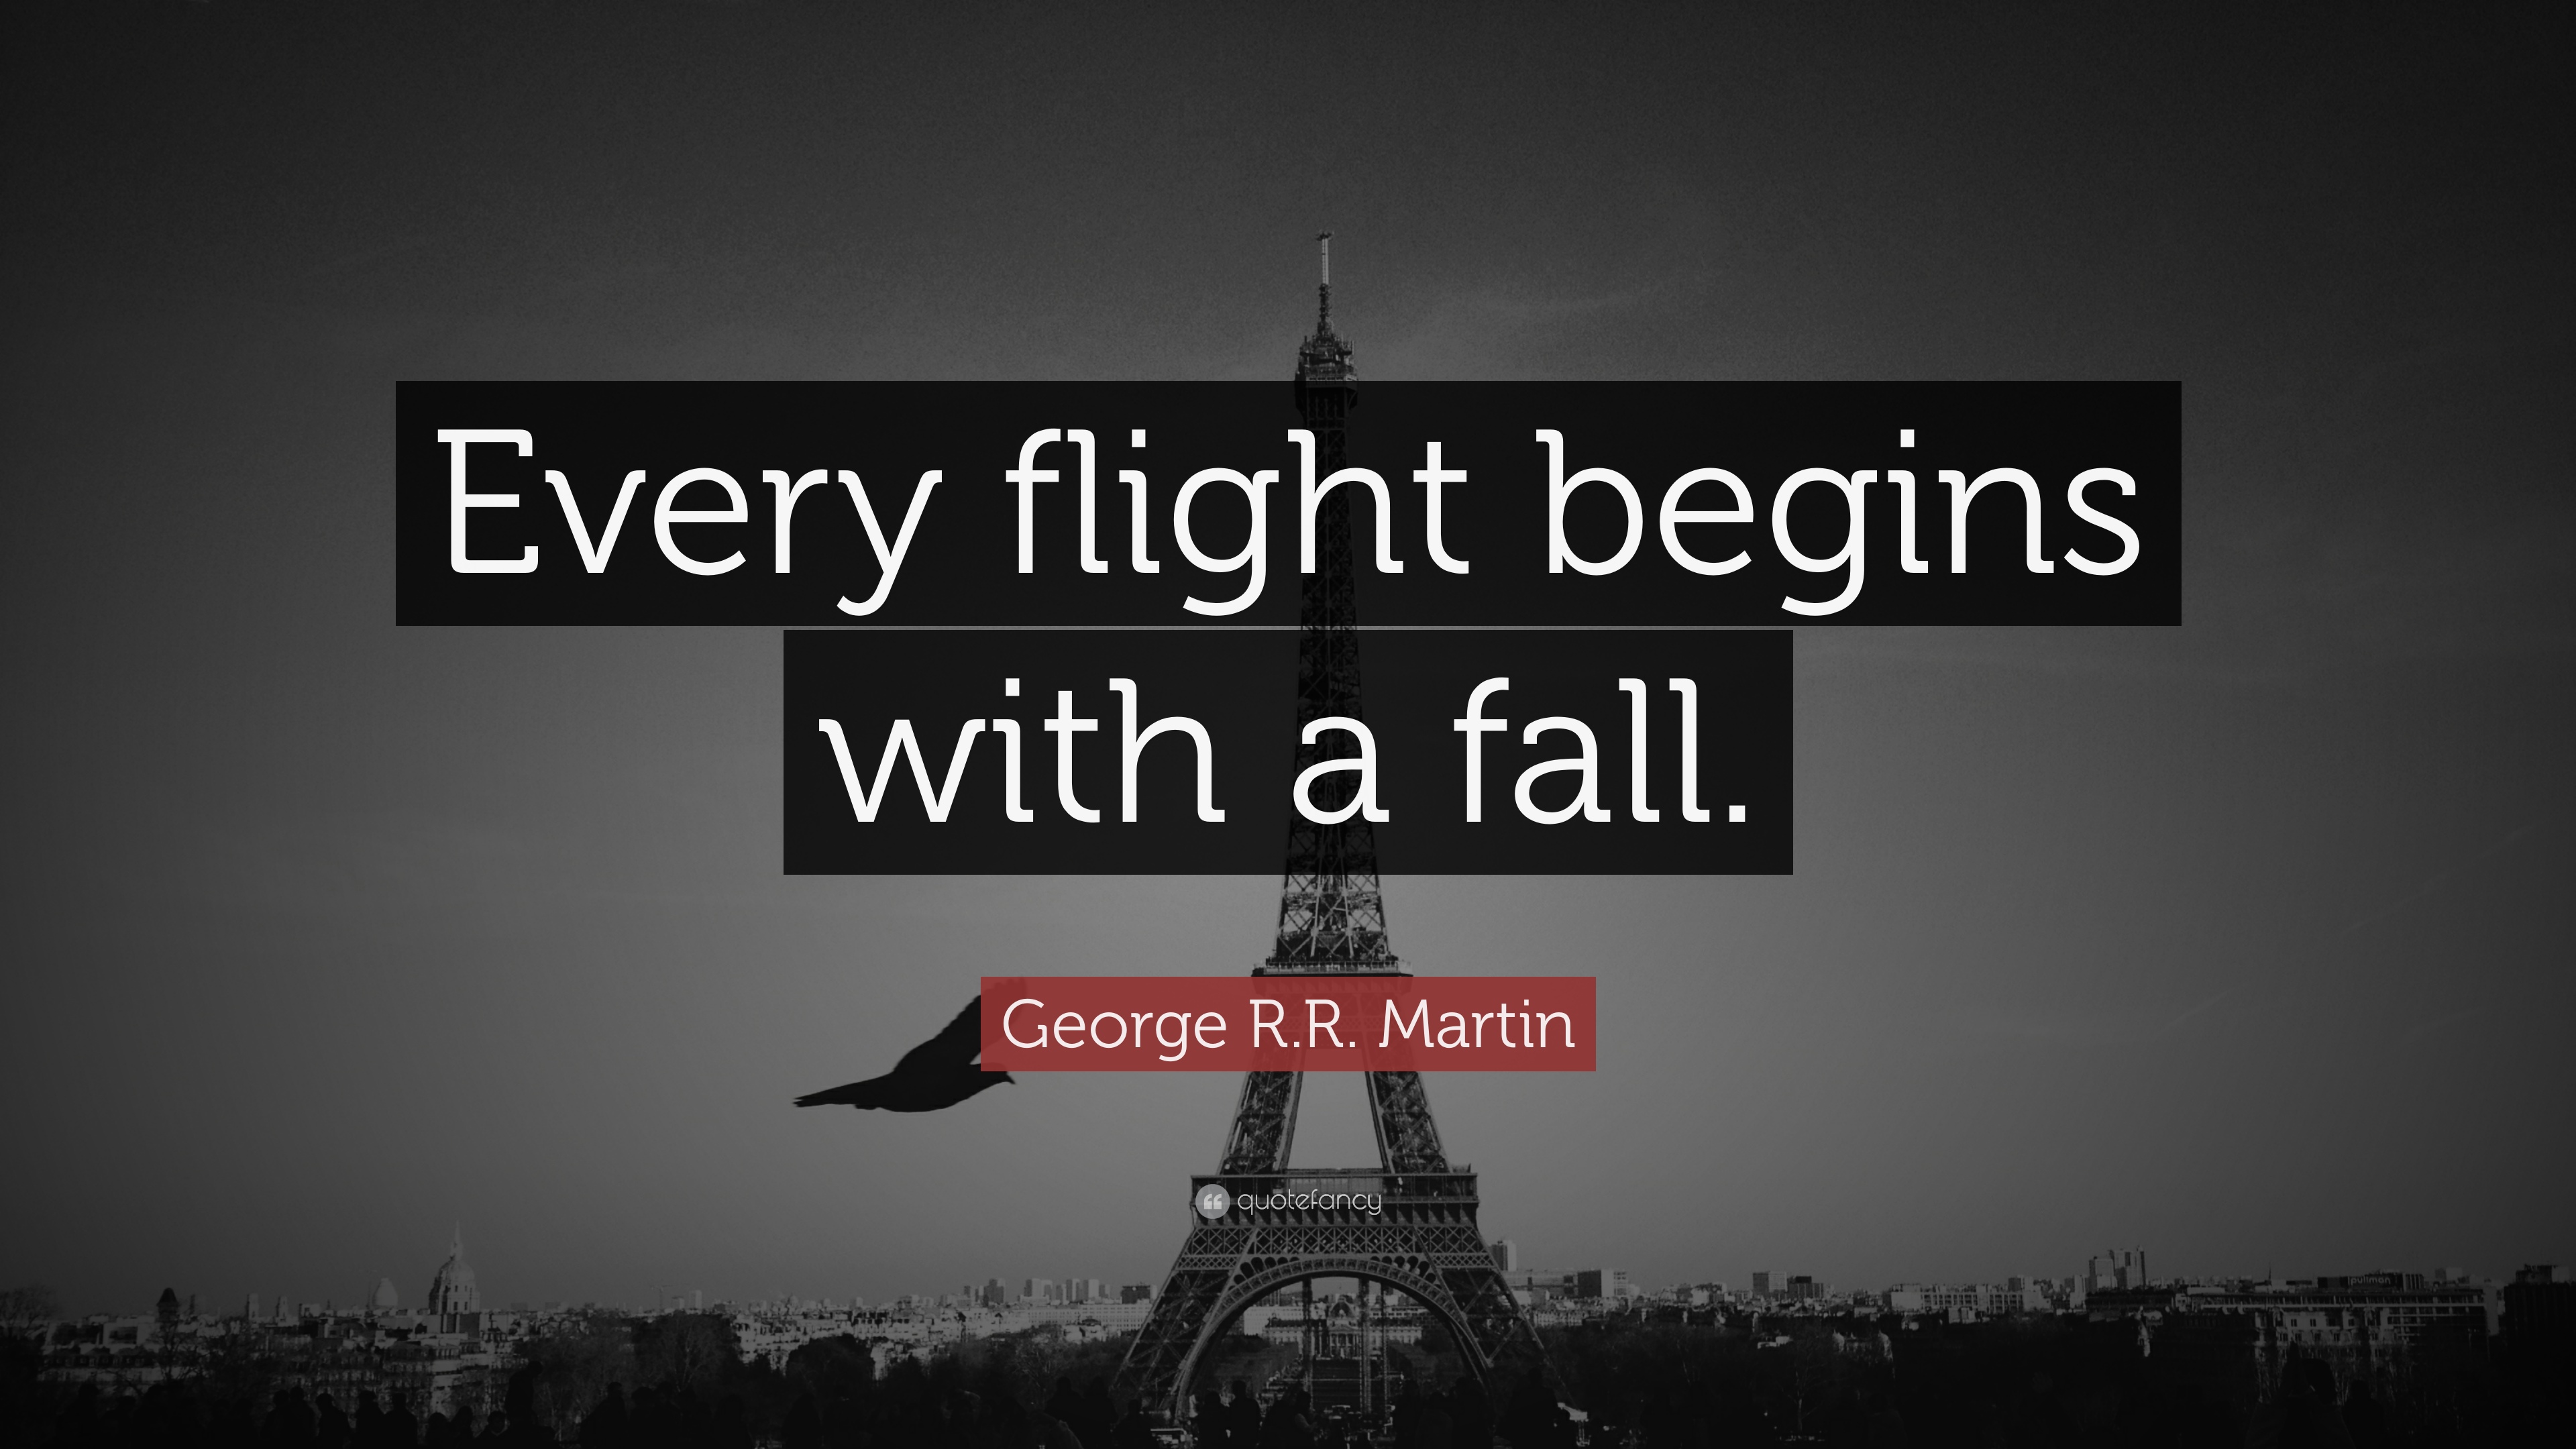 George R.R. Martin Quote: “Every flight begins with a fall.” 13